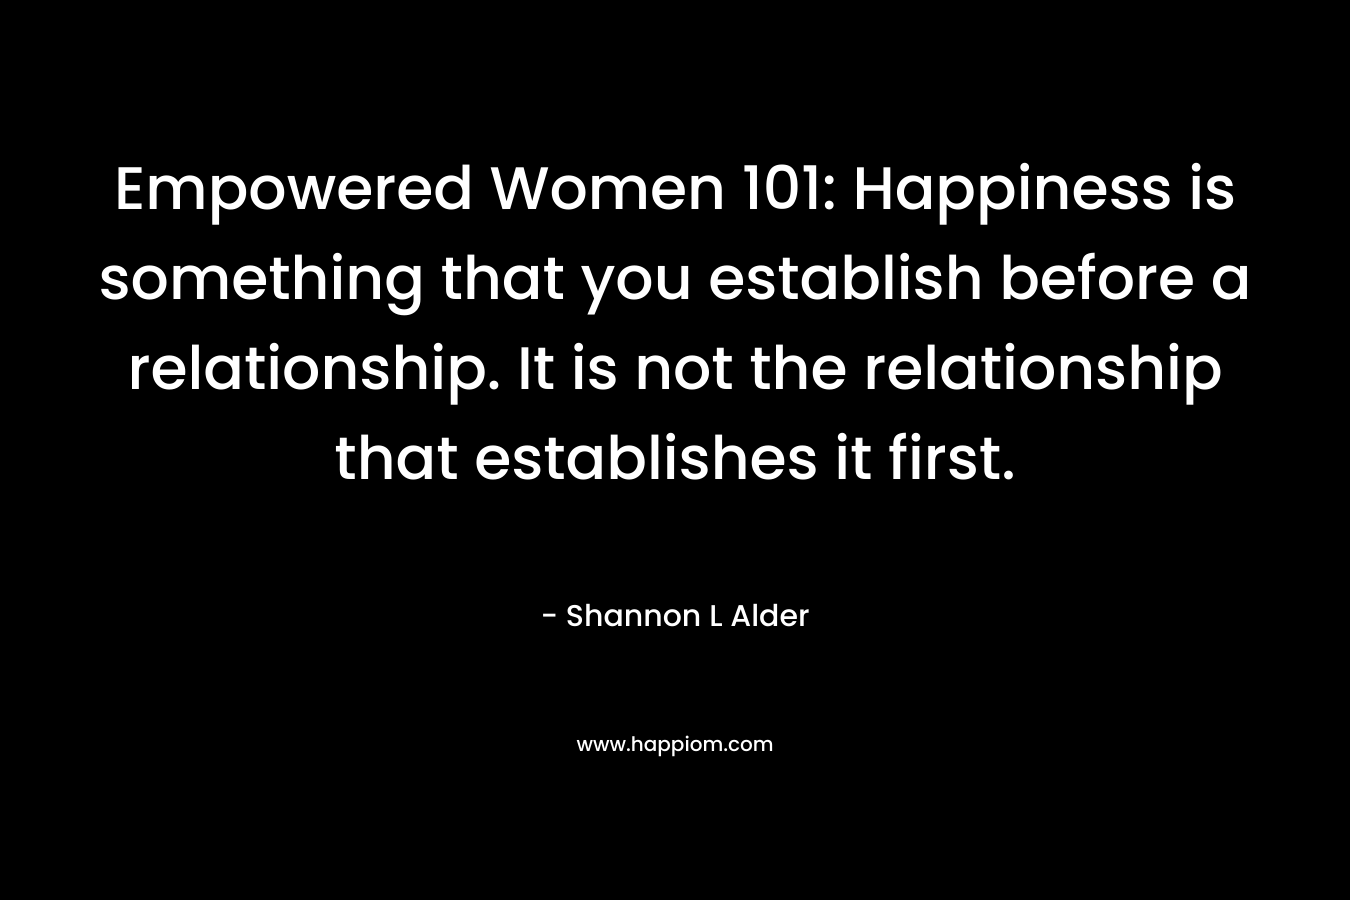 Empowered Women 101: Happiness is something that you establish before a relationship. It is not the relationship that establishes it first. – Shannon L Alder